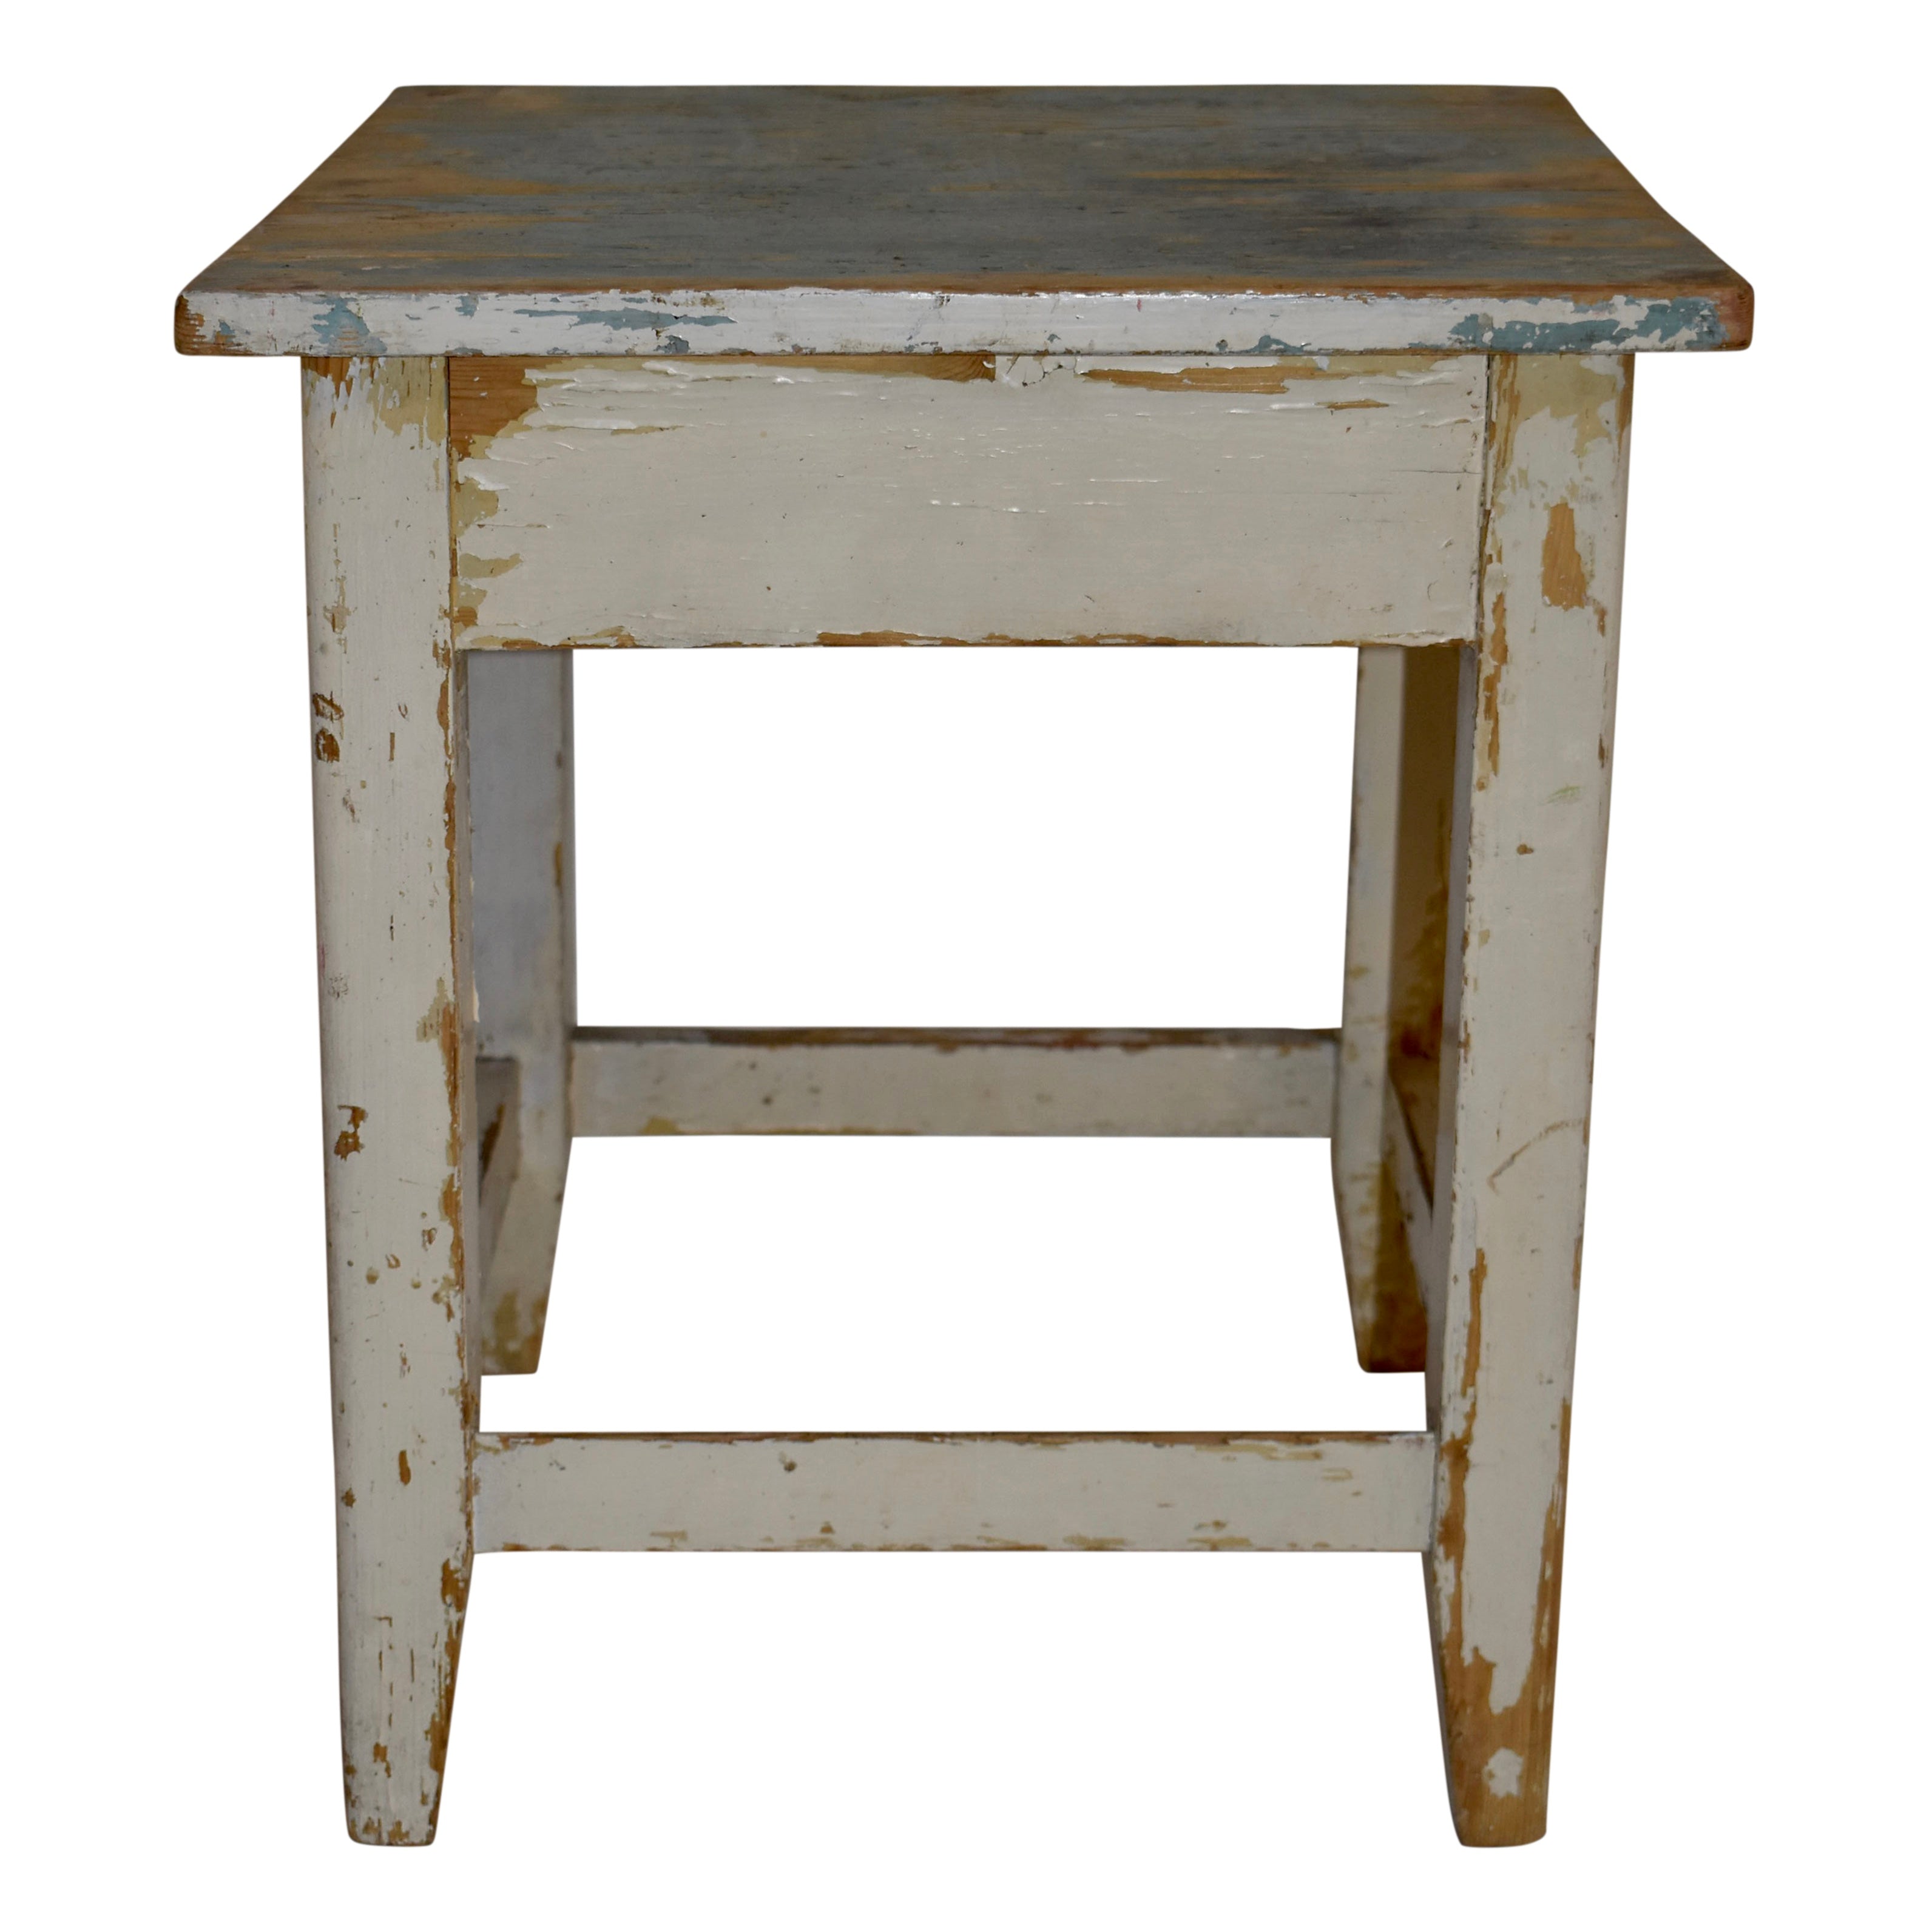 Painted Pine Stool with Drawer